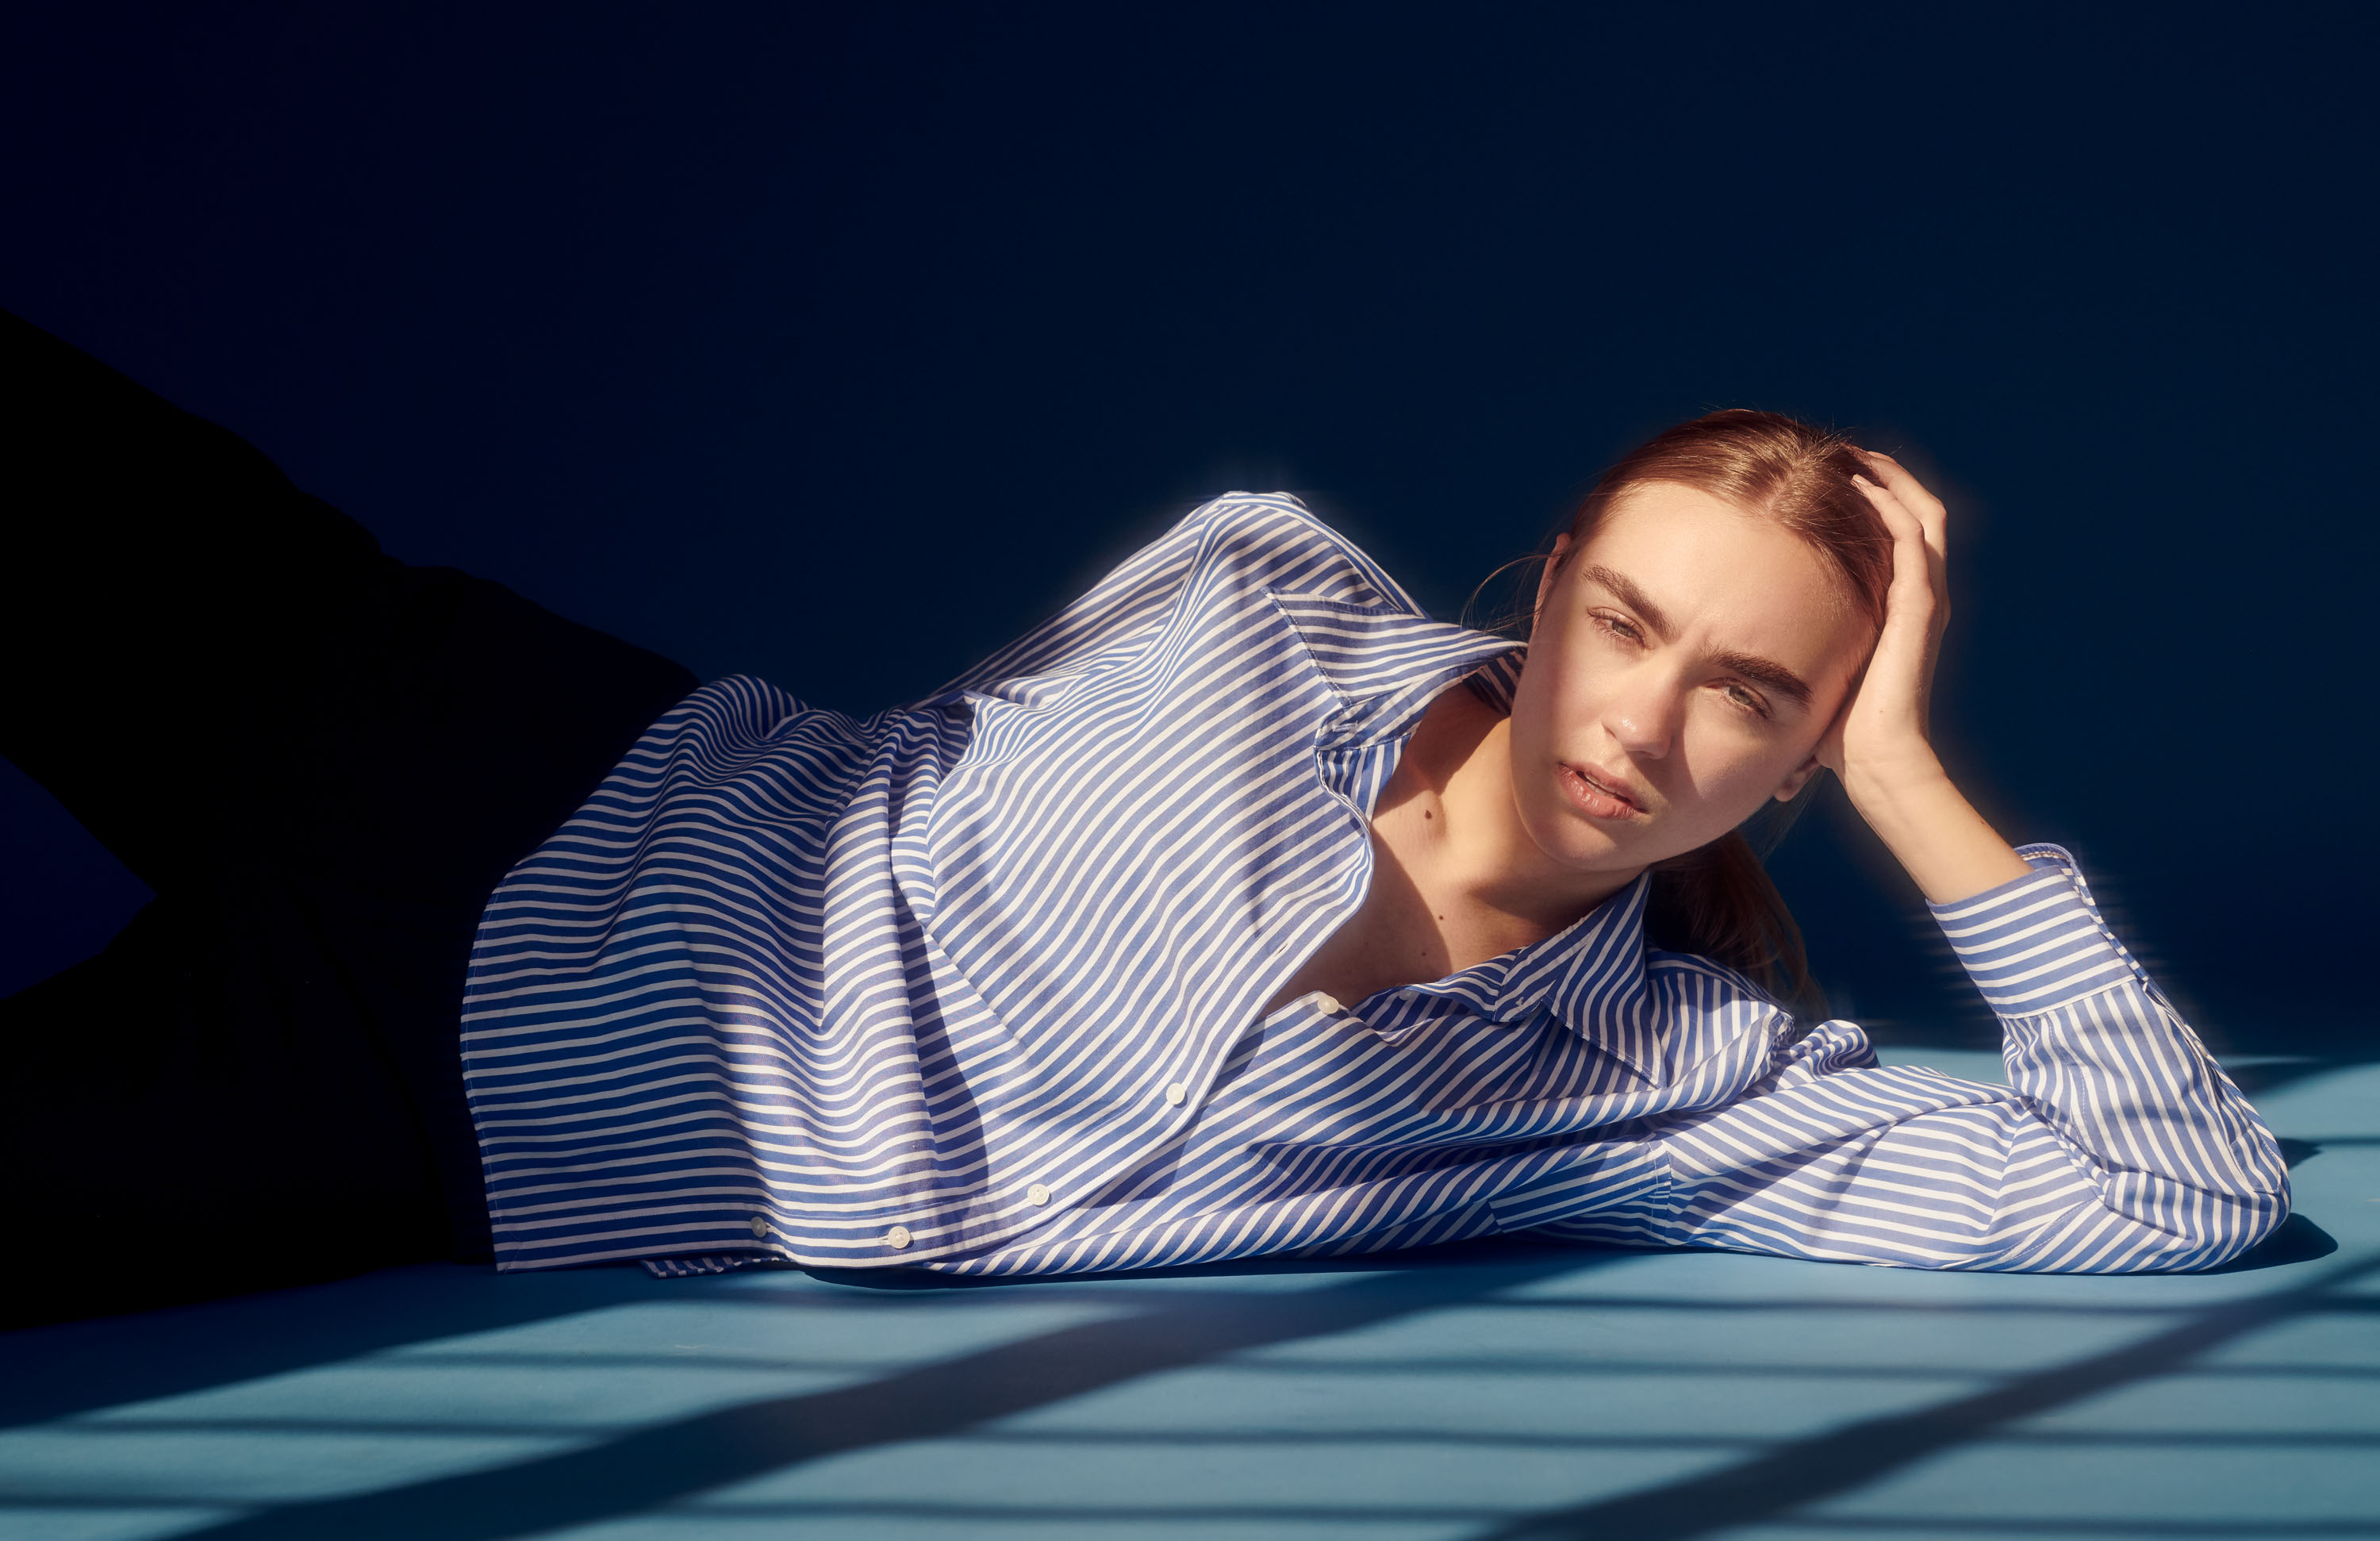 Model Rachel Hemstreet from Genetic Model laying on a blue sheet with window light on her face